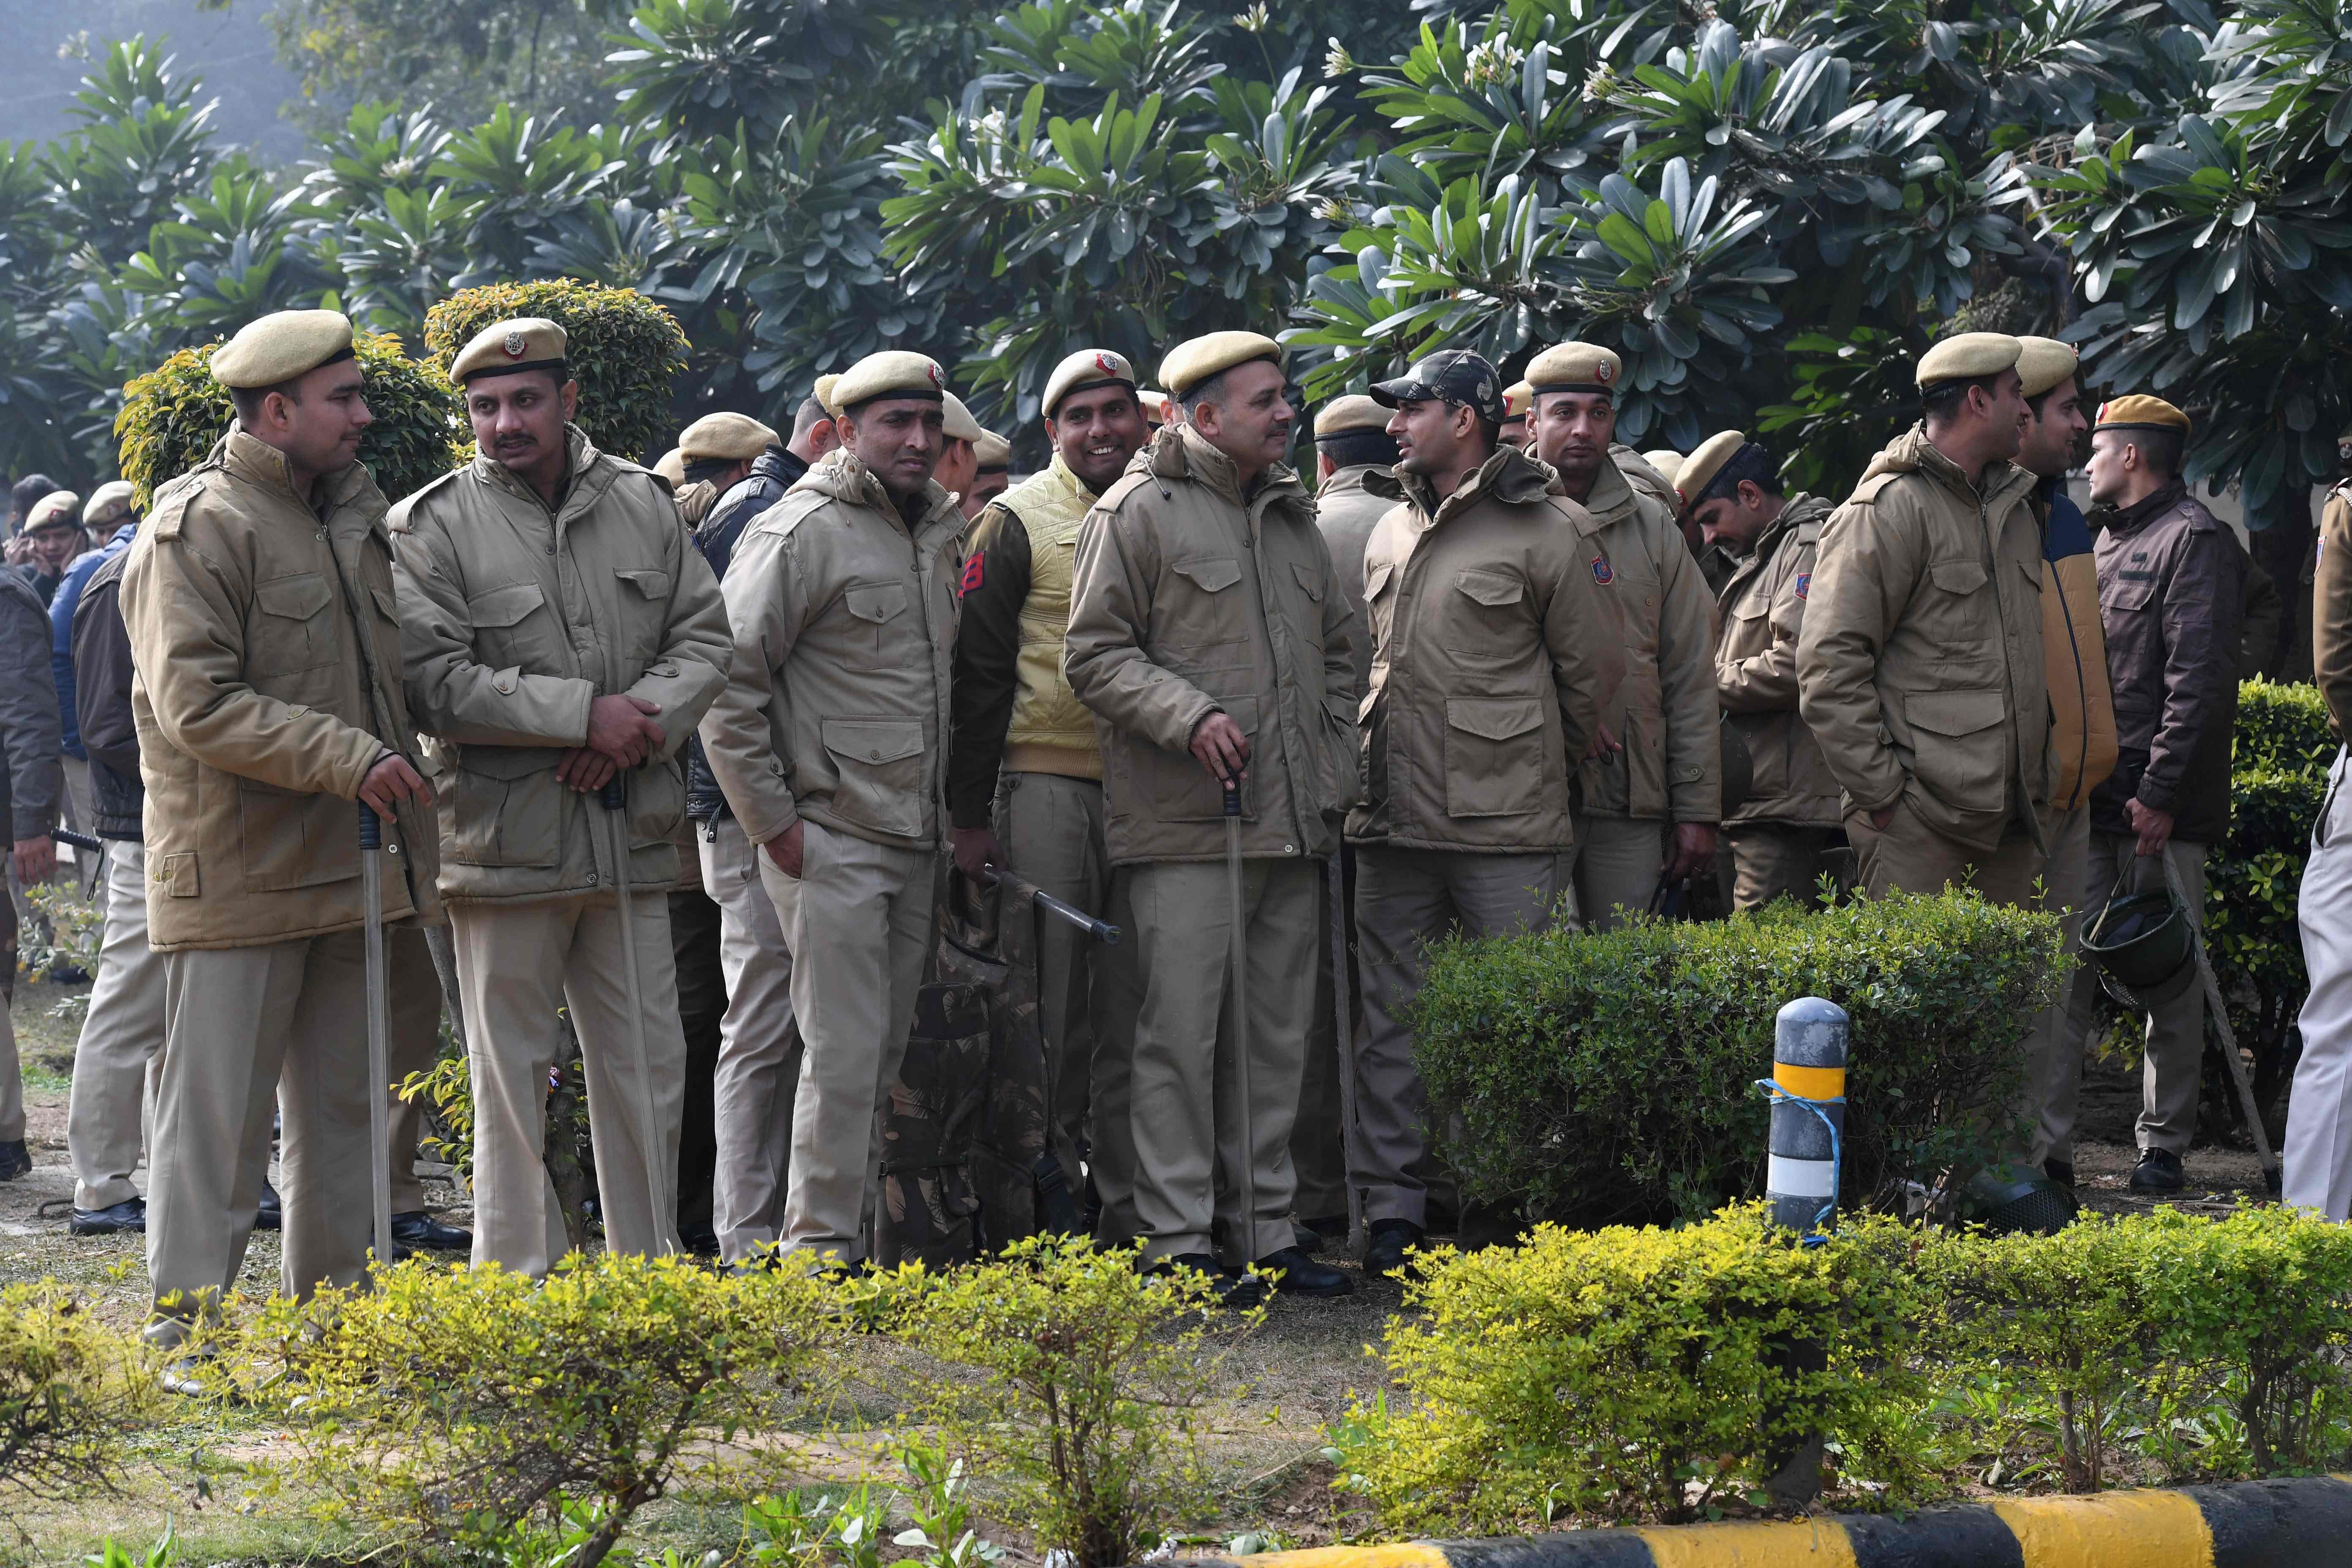 Police gather at a protest against India's new citizenship law in New Delhi. (PTI Photo)